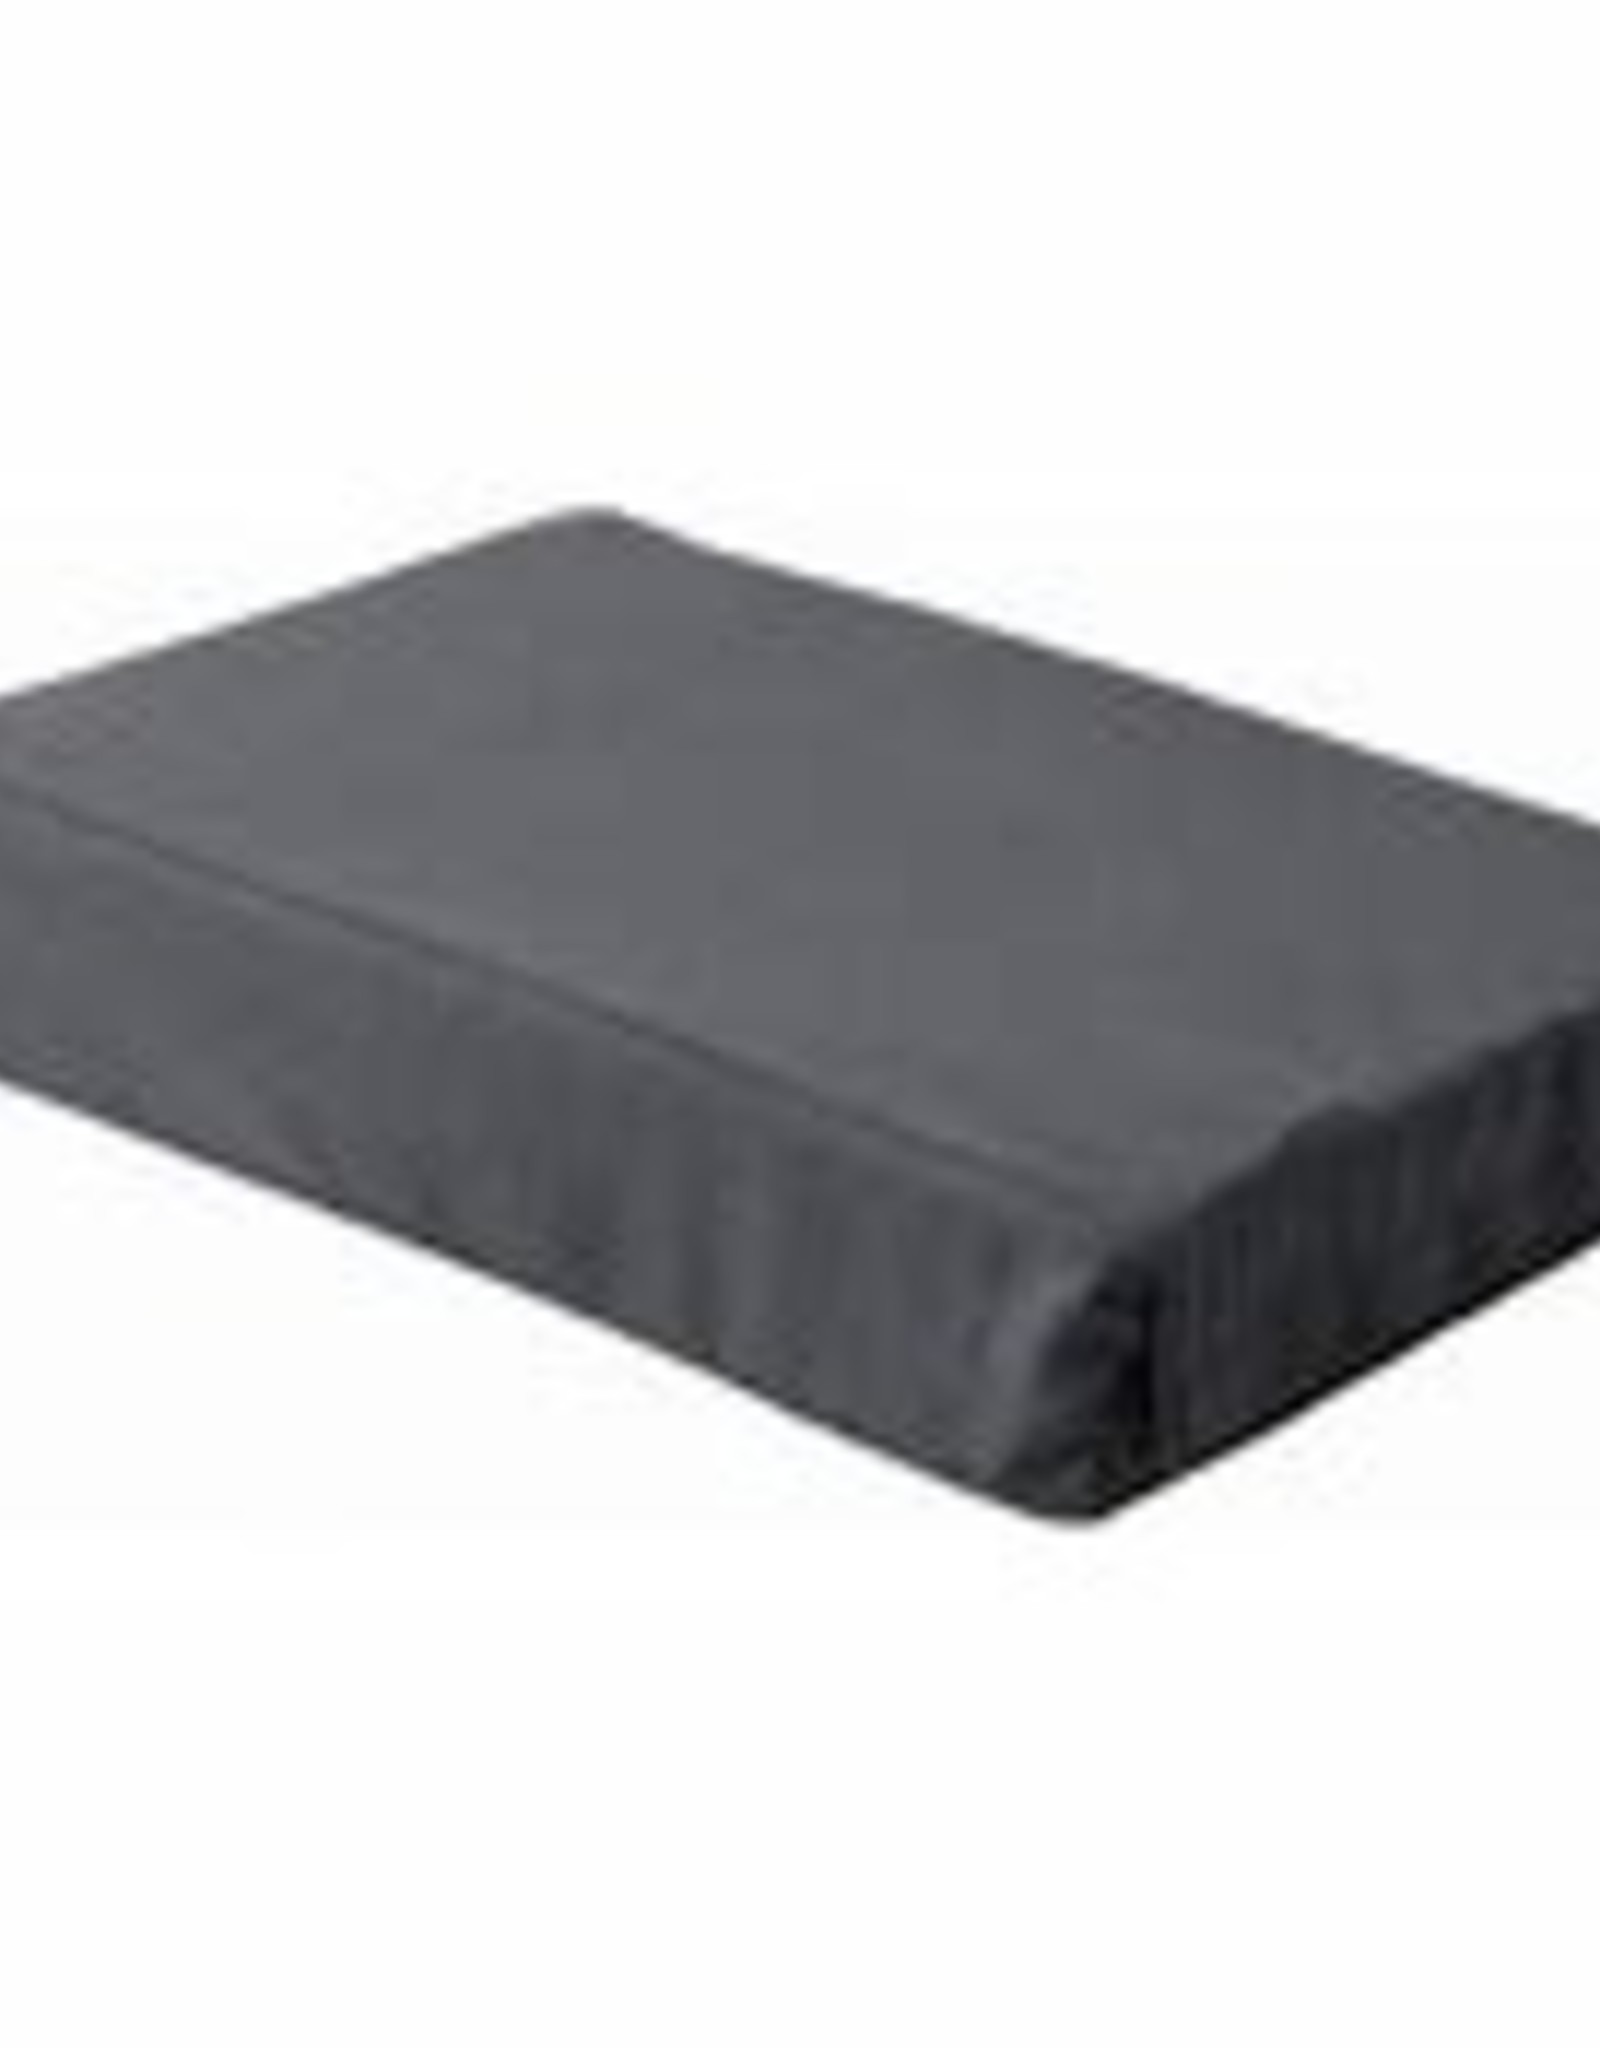 Chip Foam Yoga Block with cover